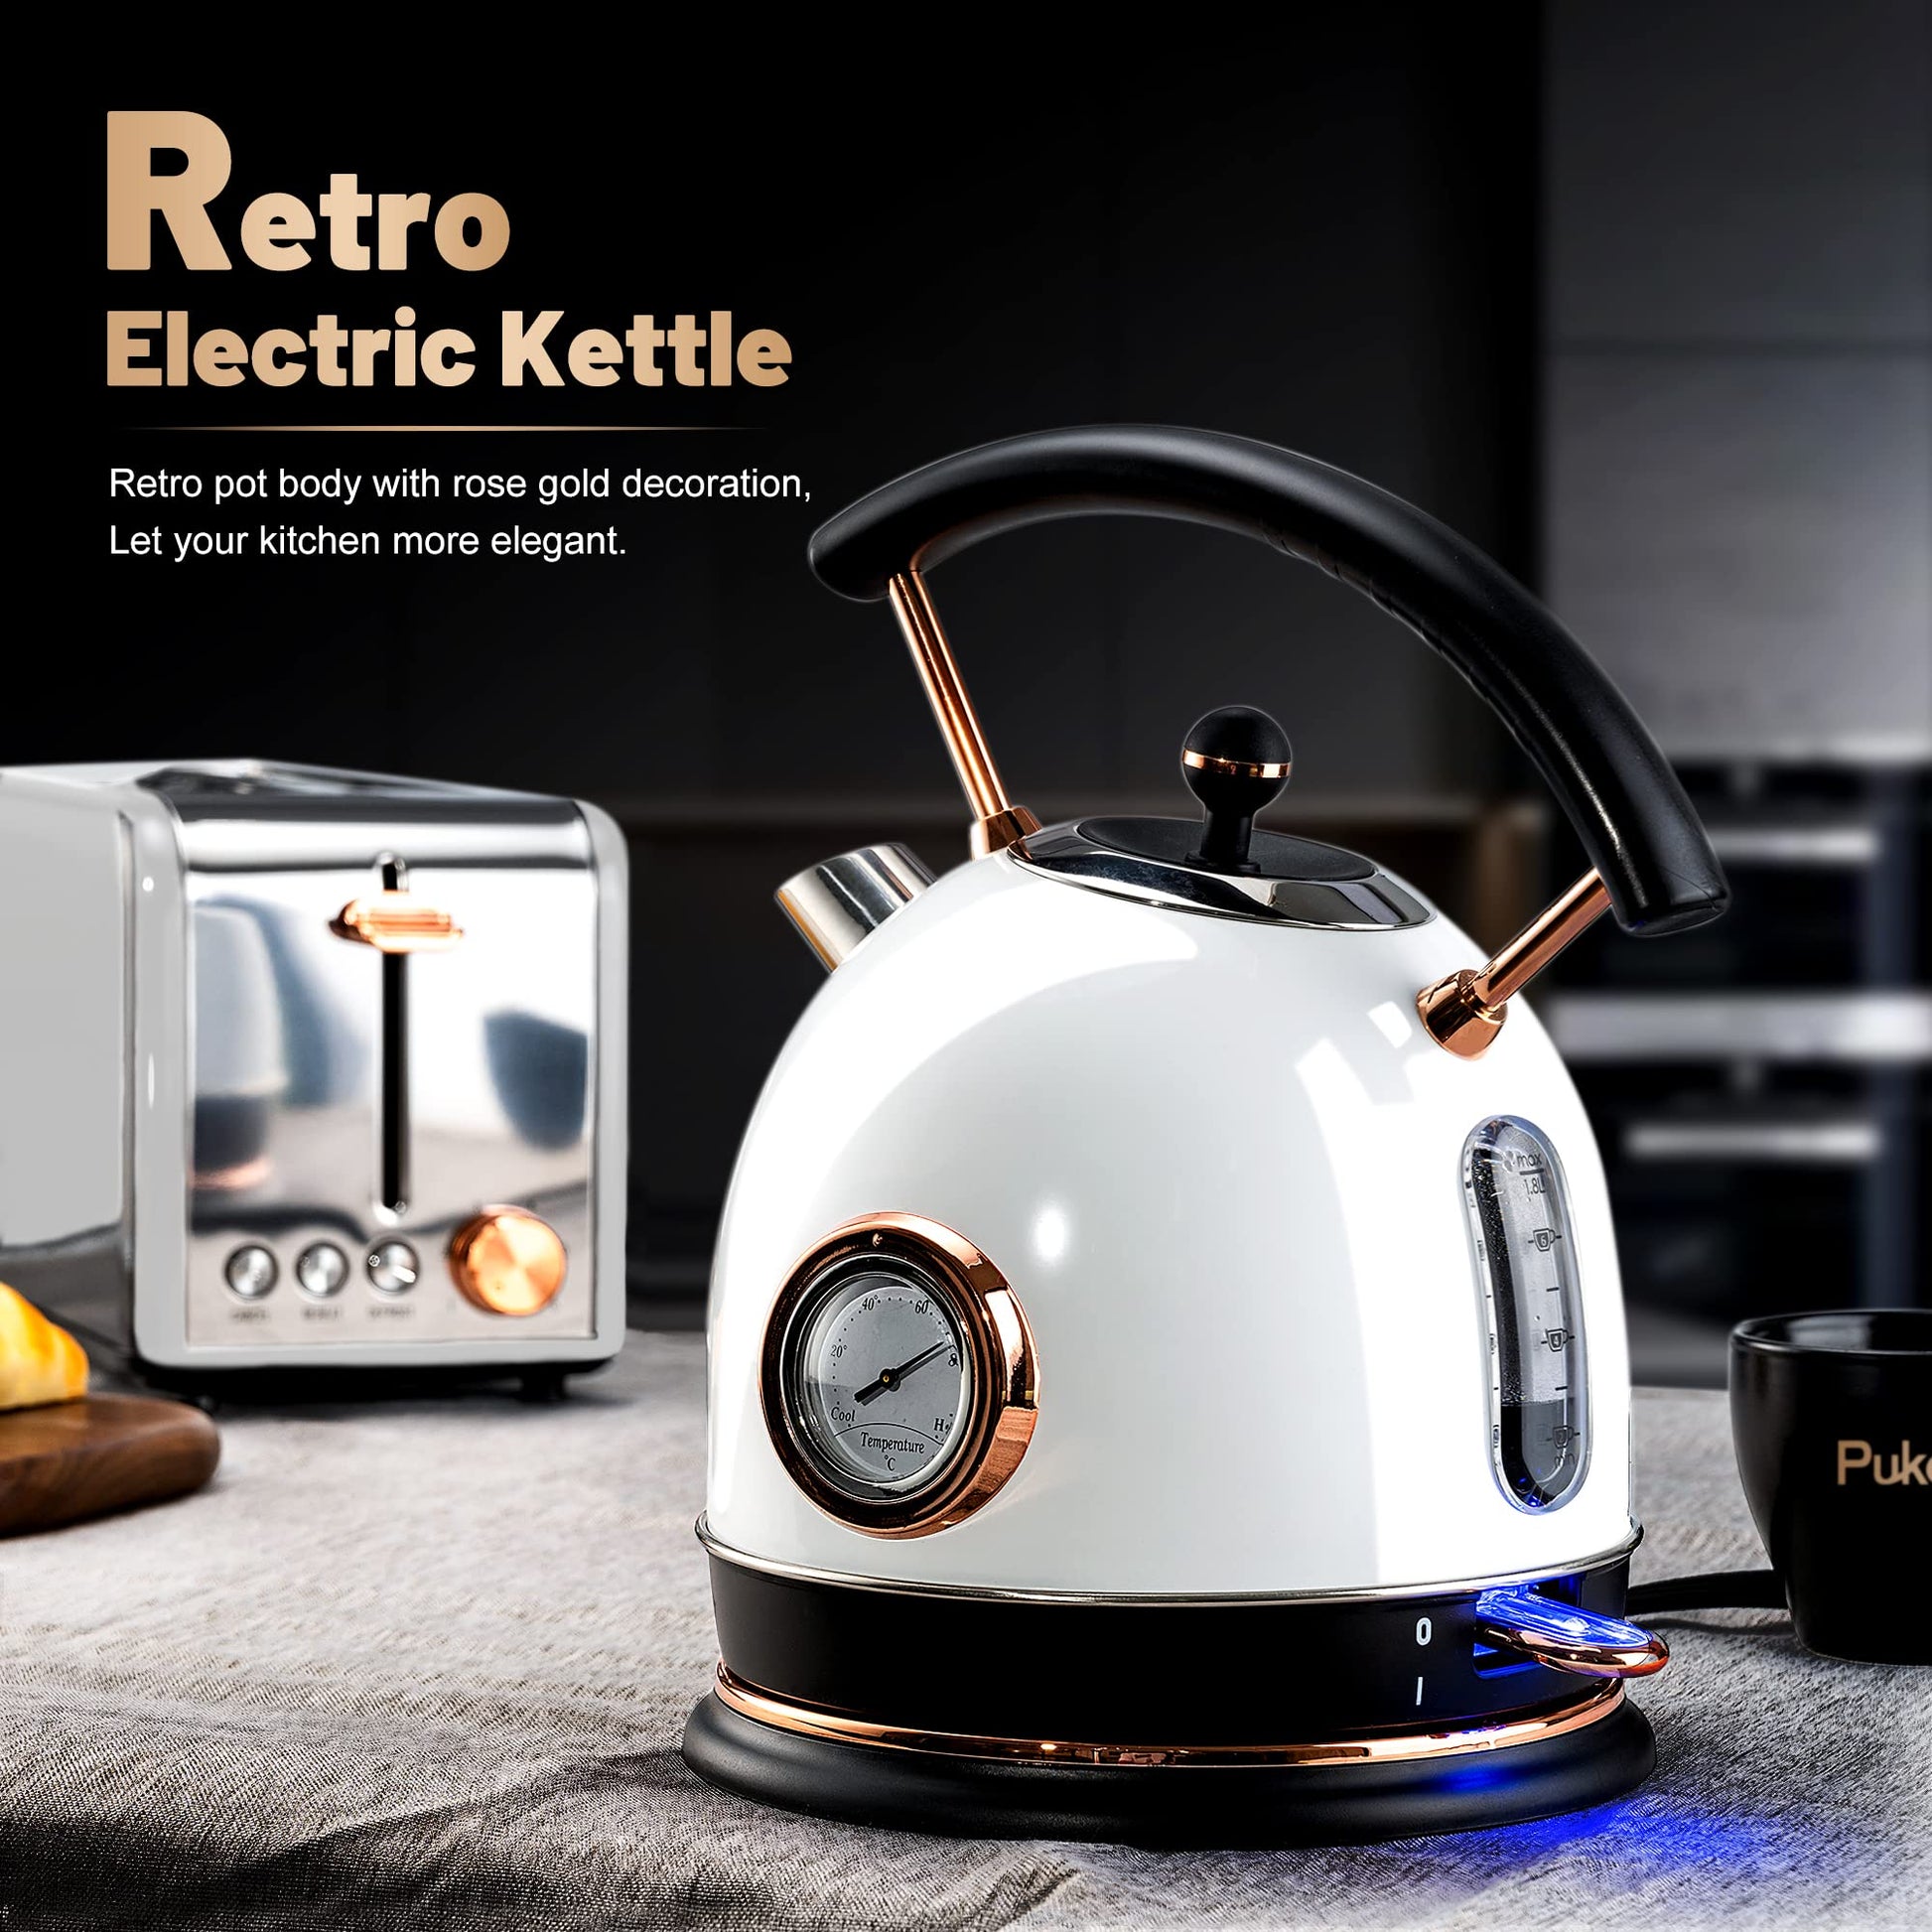 Electric Kettle with Thermometer 1.8L - Top Kitchen Gadget [Video] [Video]